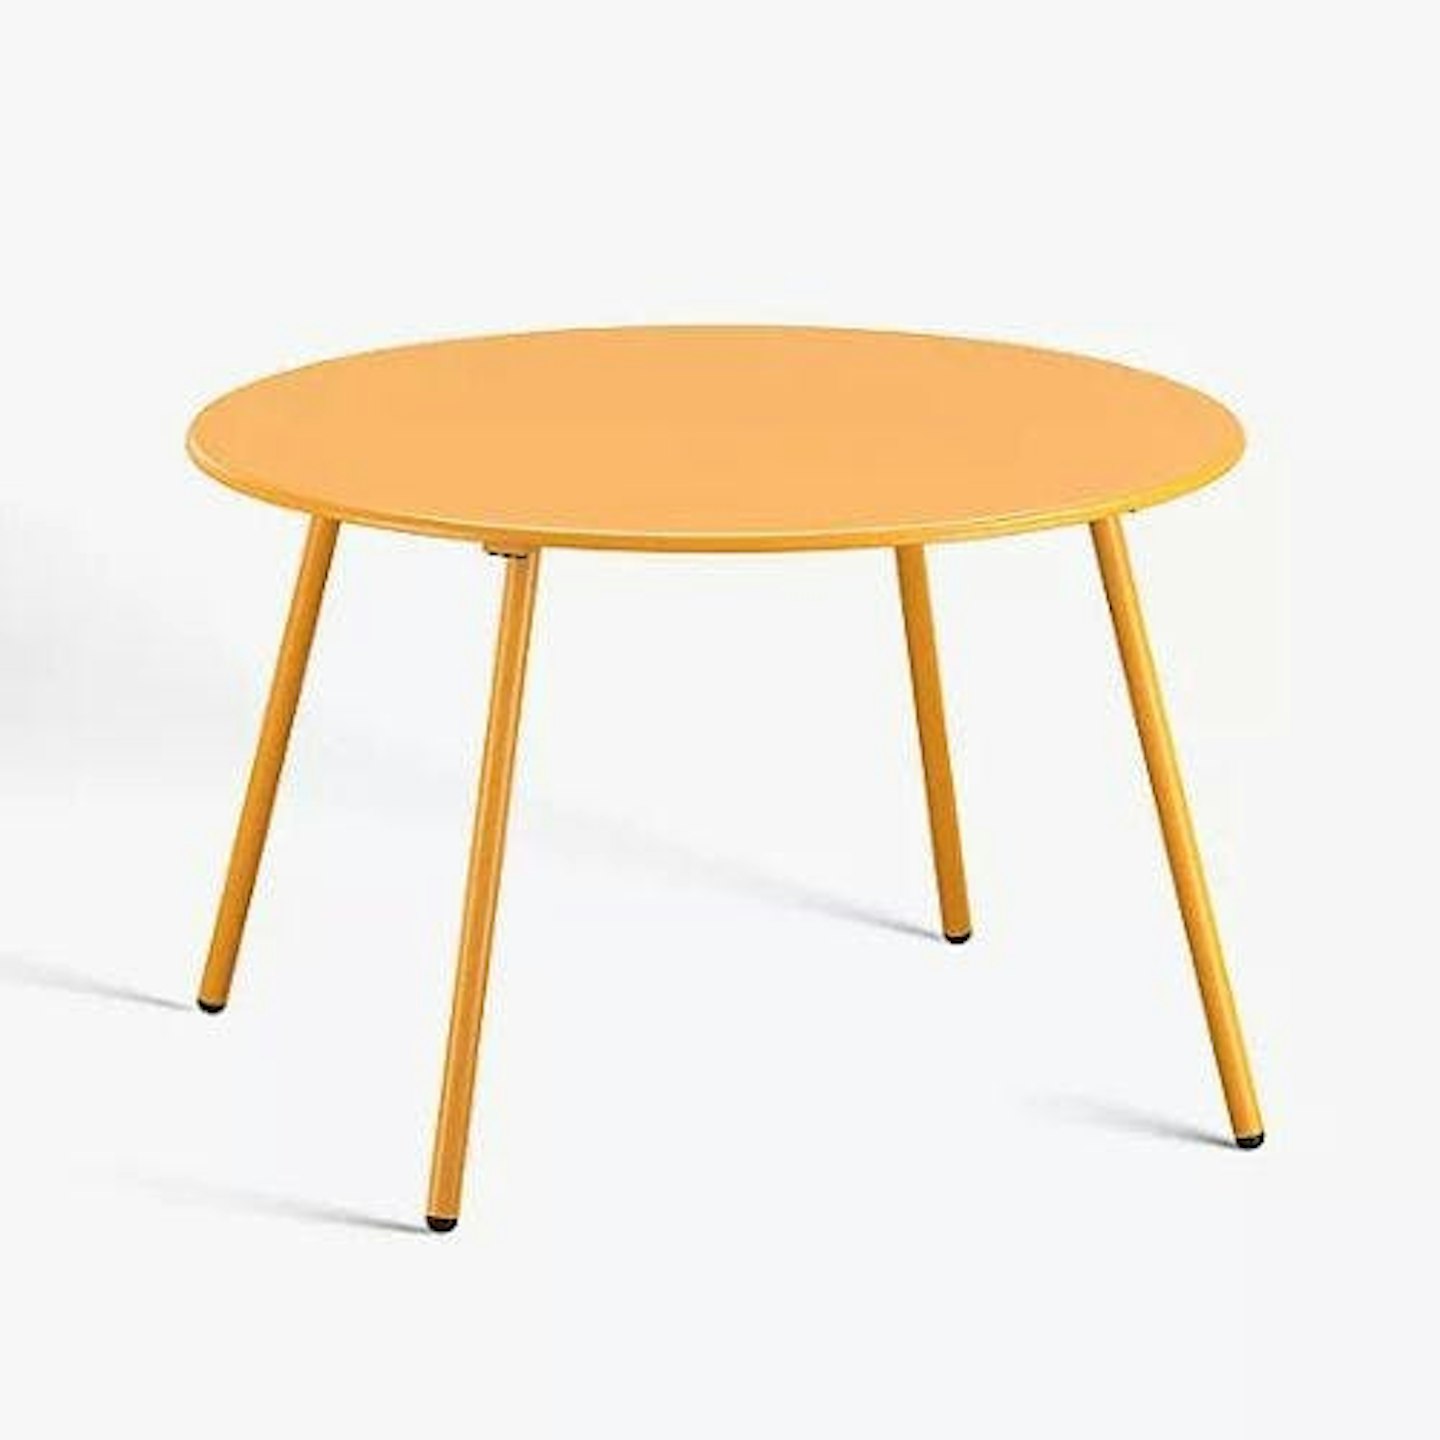 ANYDAY John Lewis and Partners Brights Round Metal Garden Coffee Table